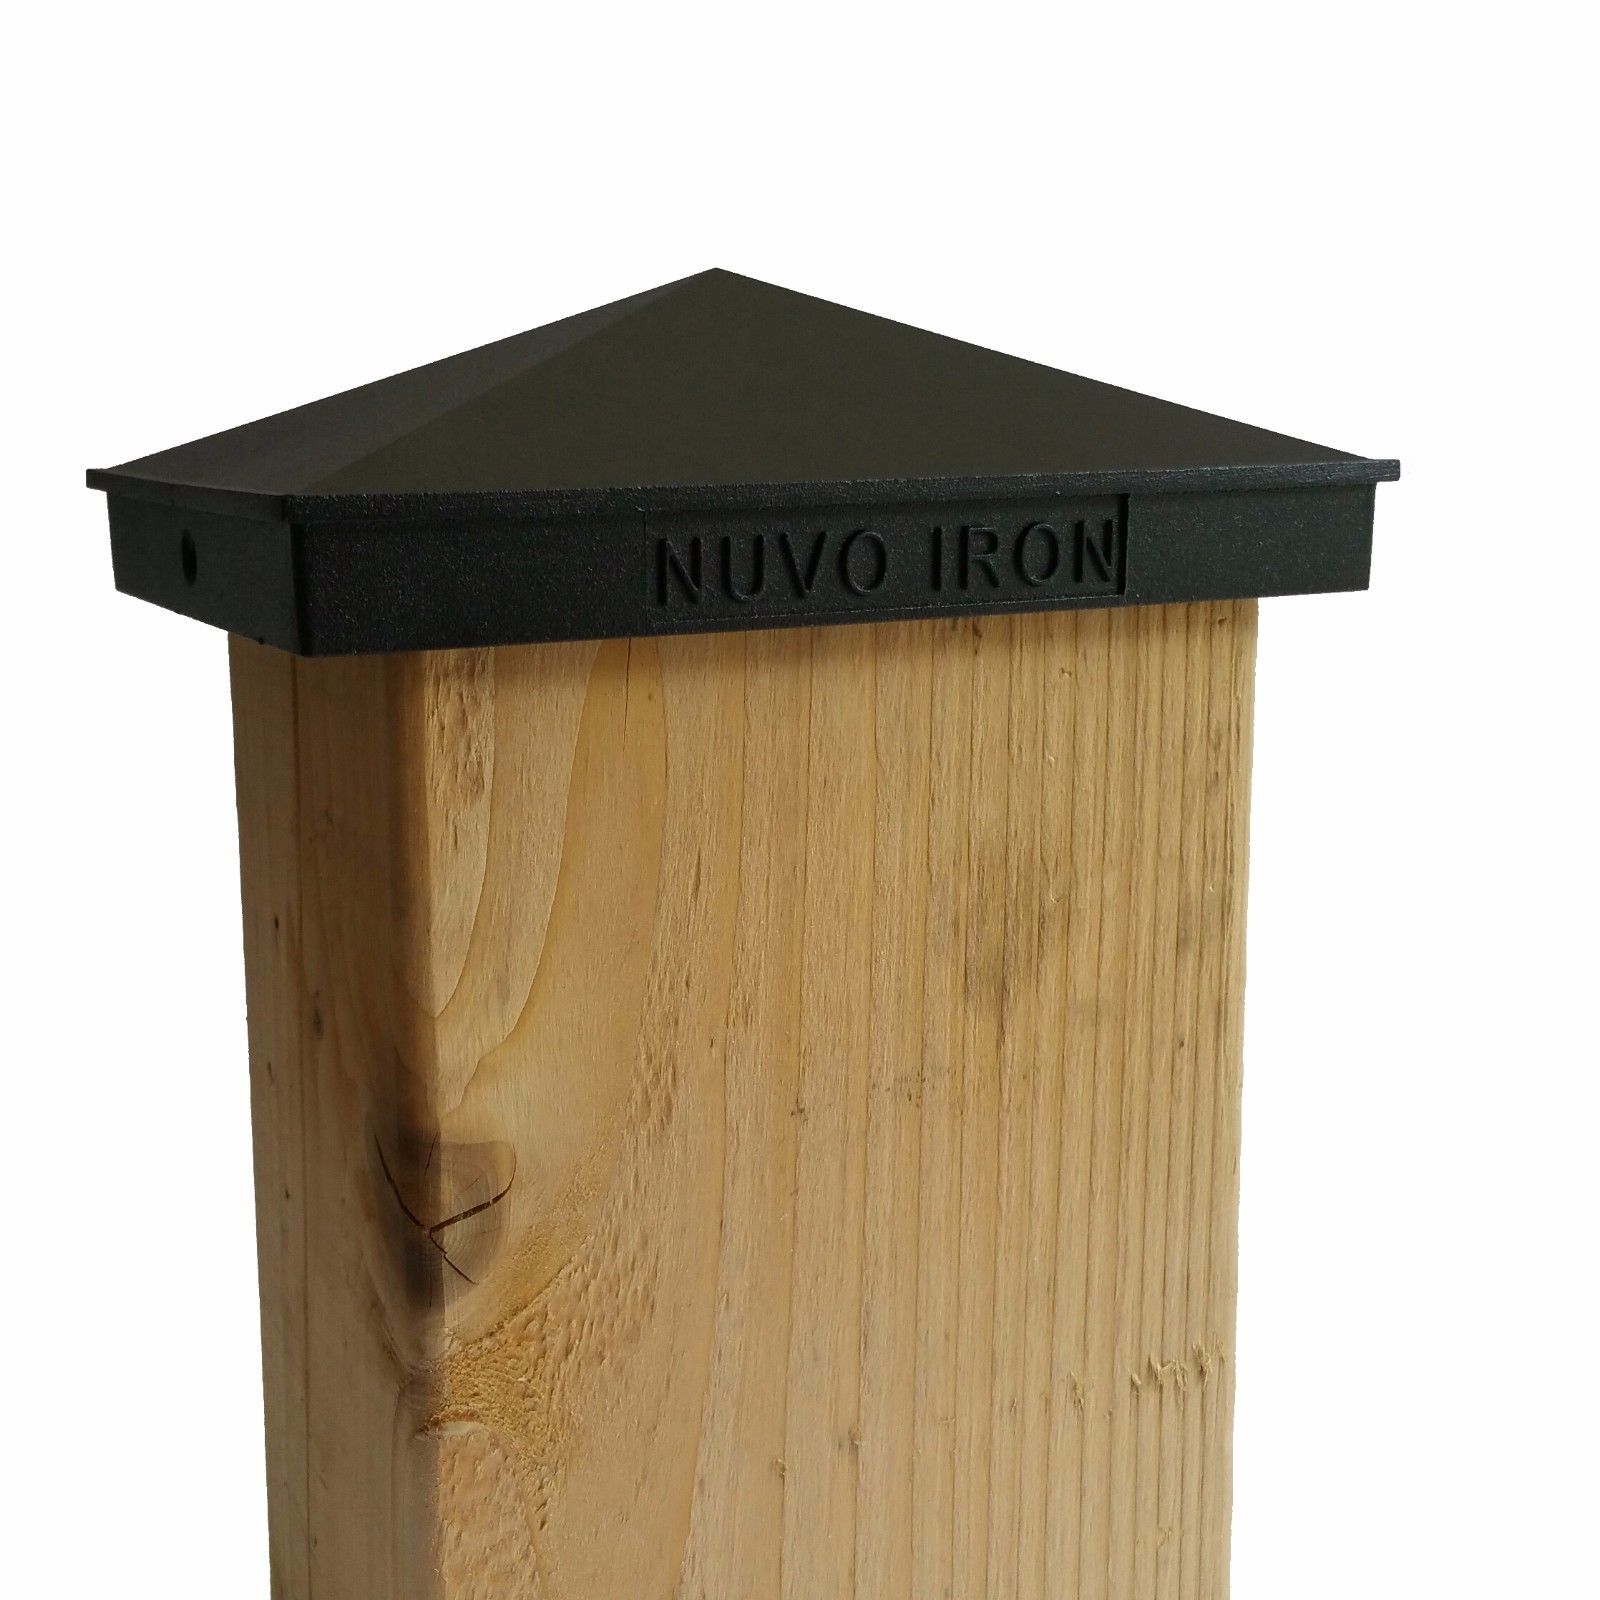 Details about   Nuvo Iron Decorative Pyramid Post Cap for 3.5" x 5.5" Black 4" x 6" Posts 